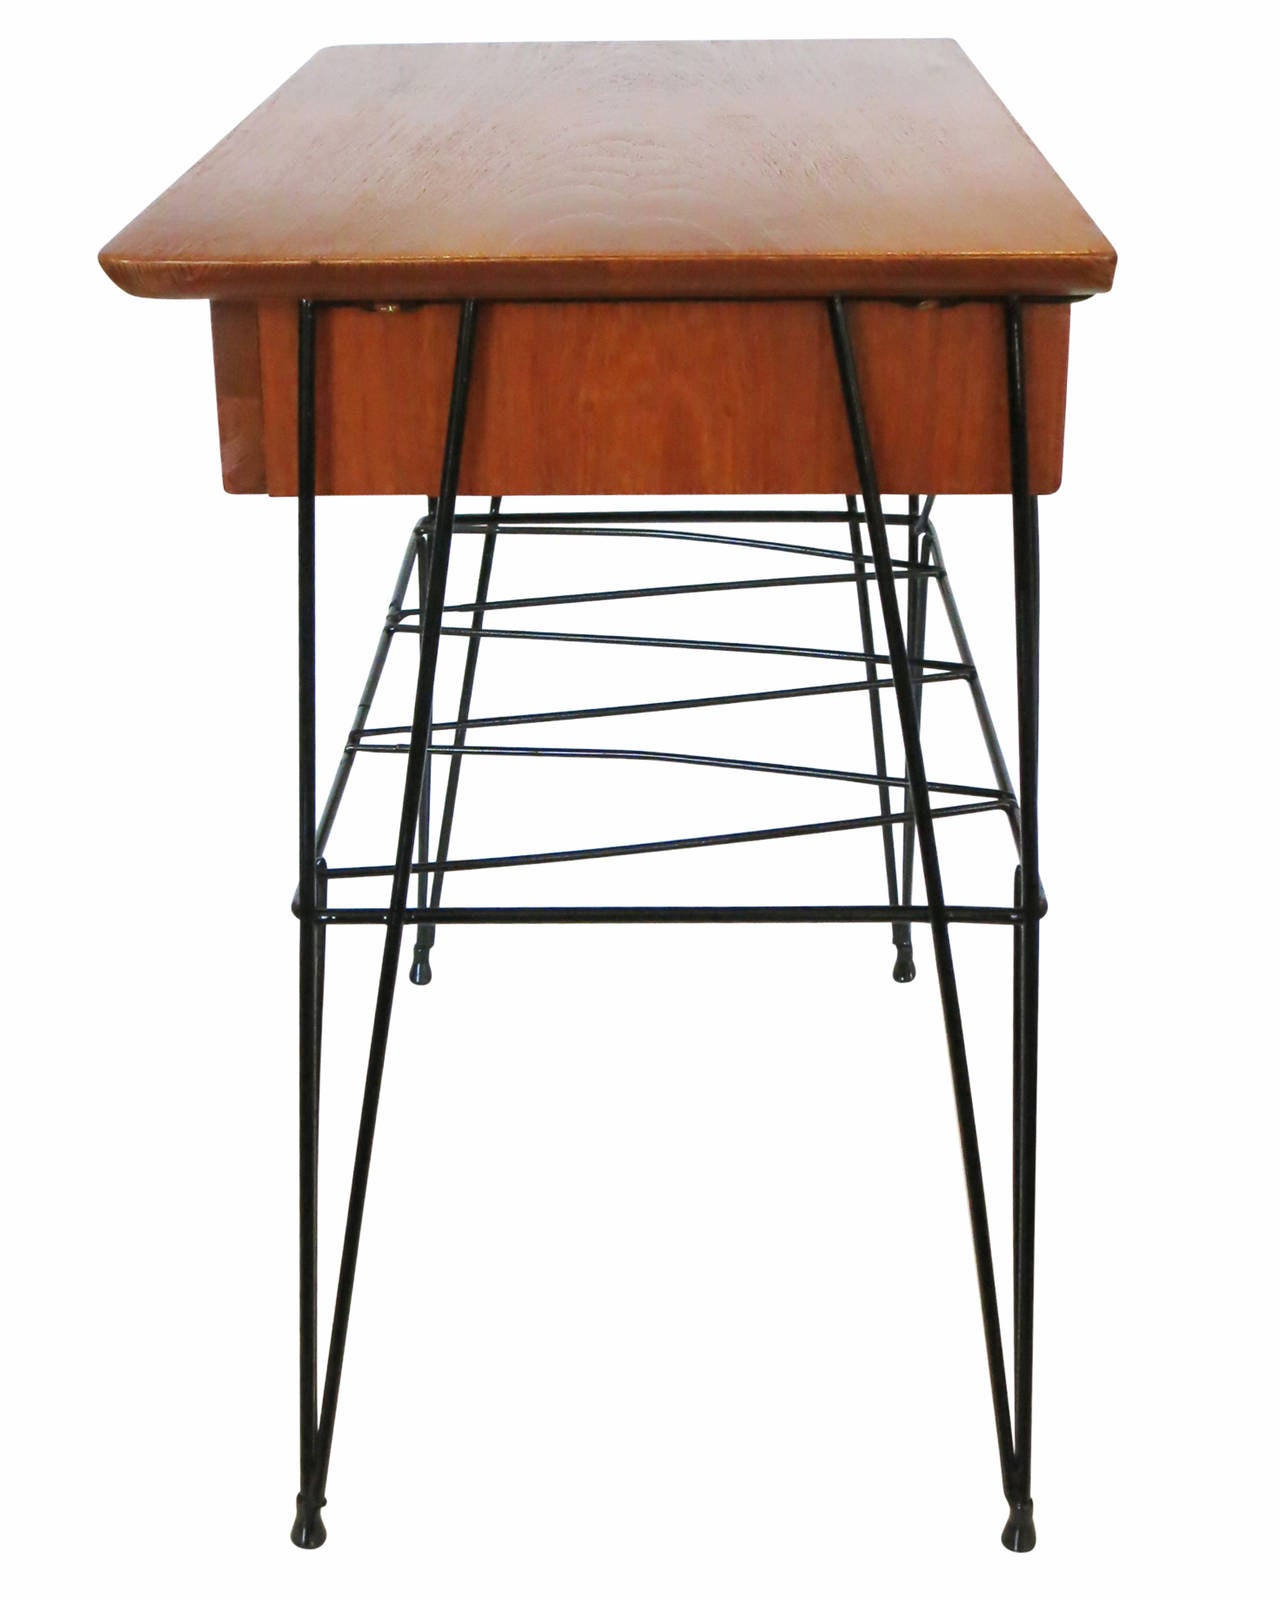 Mid-20th Century Royere Style Wire Frame Sculptural Table